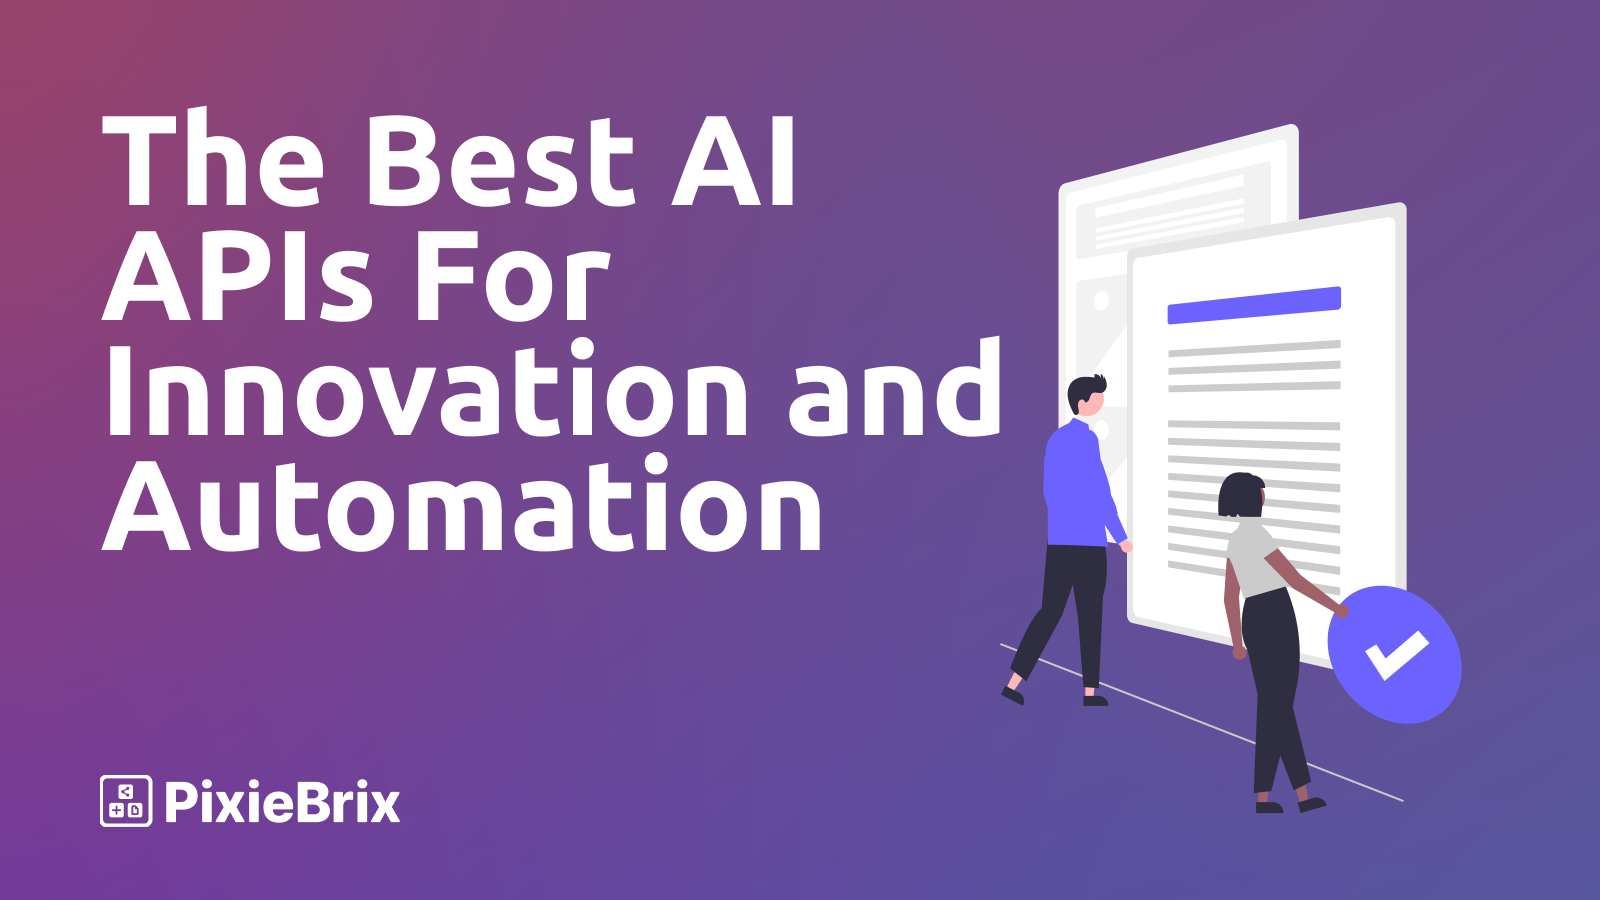 The 6 Top AI APIs for Those Who Want To Automate While They Innovate